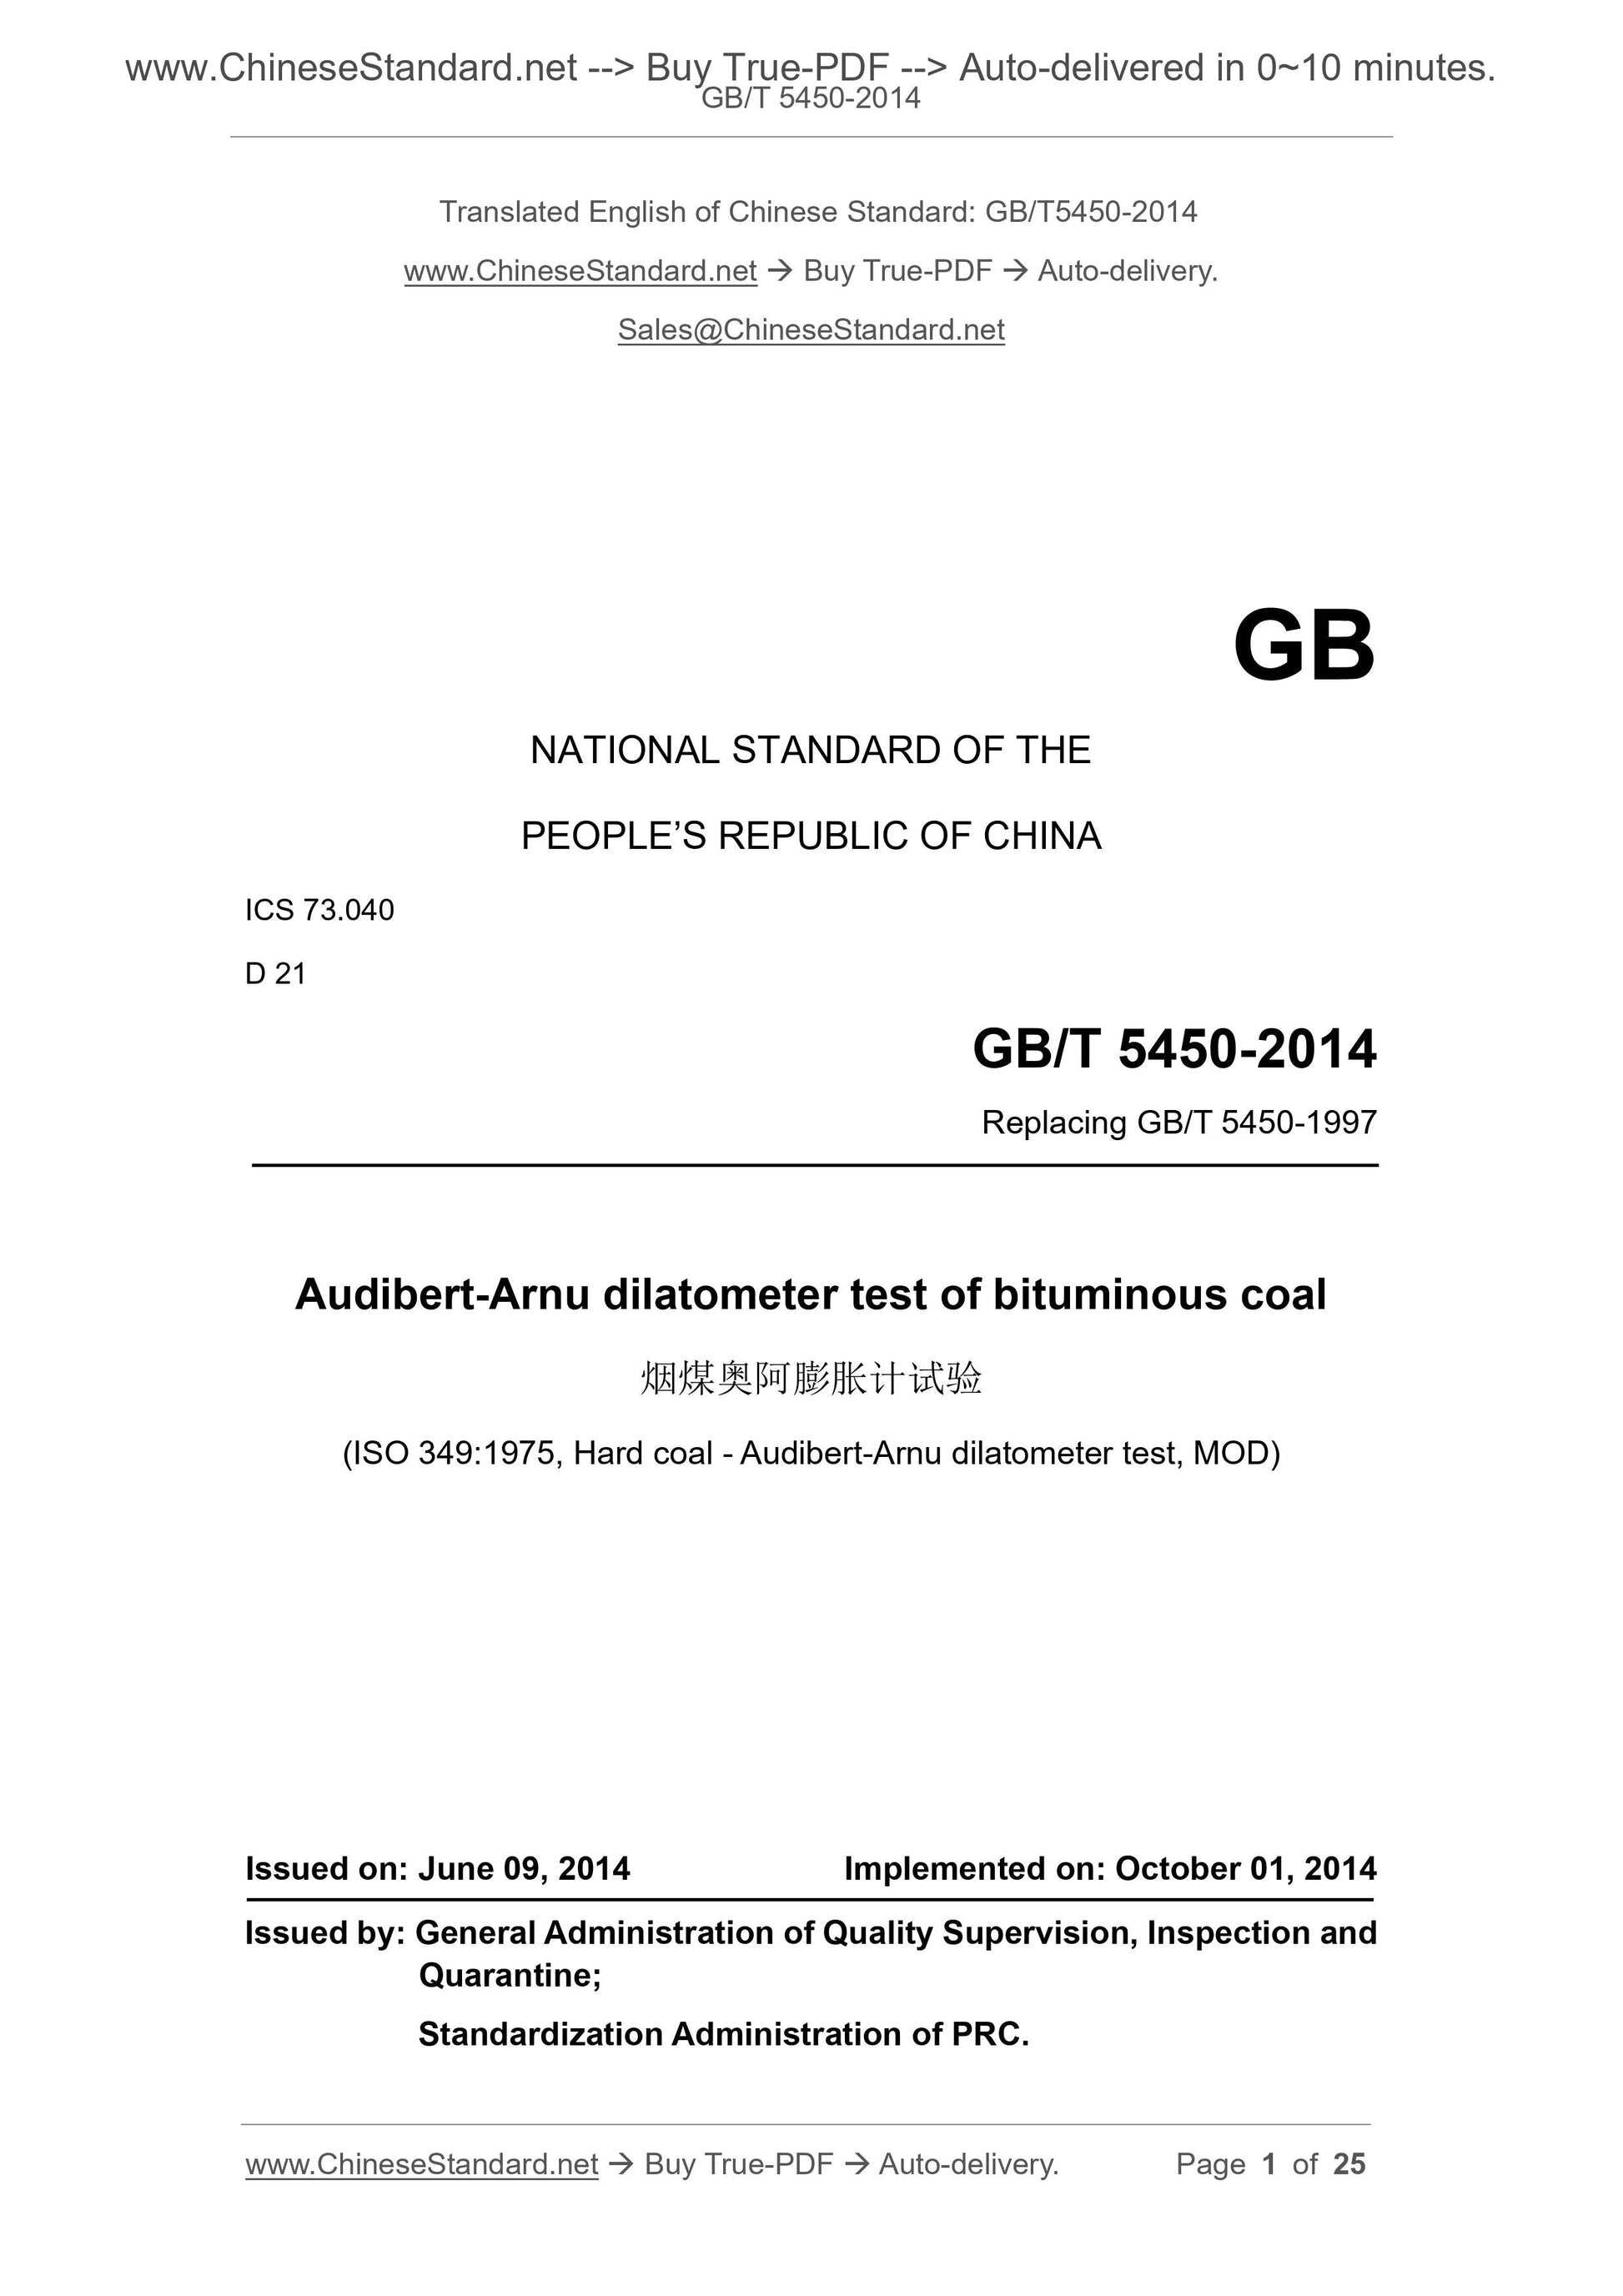 GB/T 5450-2014 Page 1